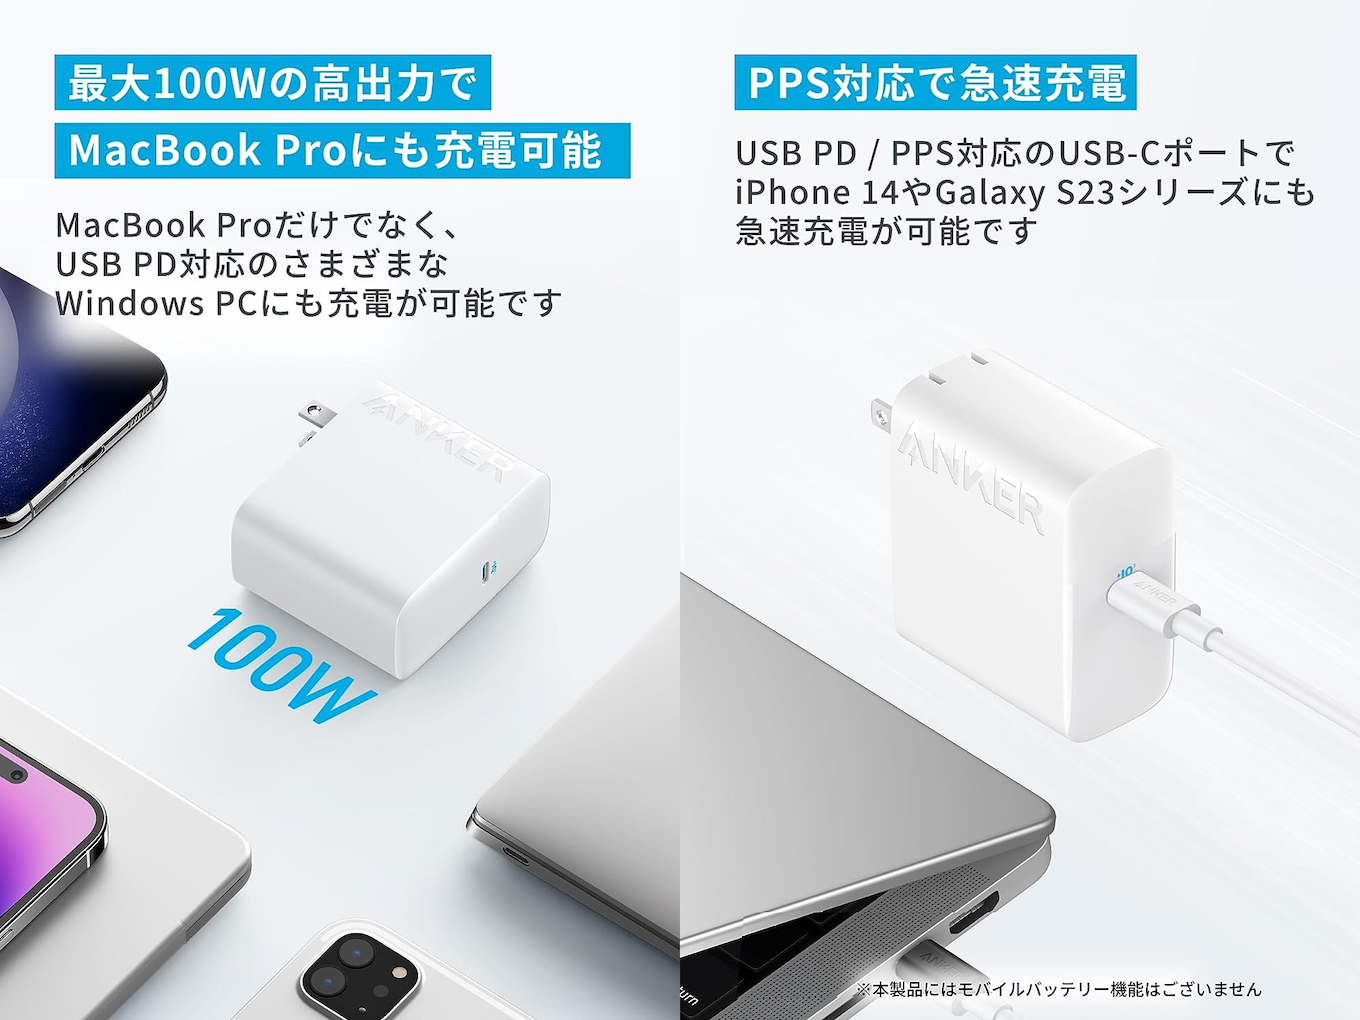 Anker 317 Charger (100W) with USB-C & USB-C ケーブル